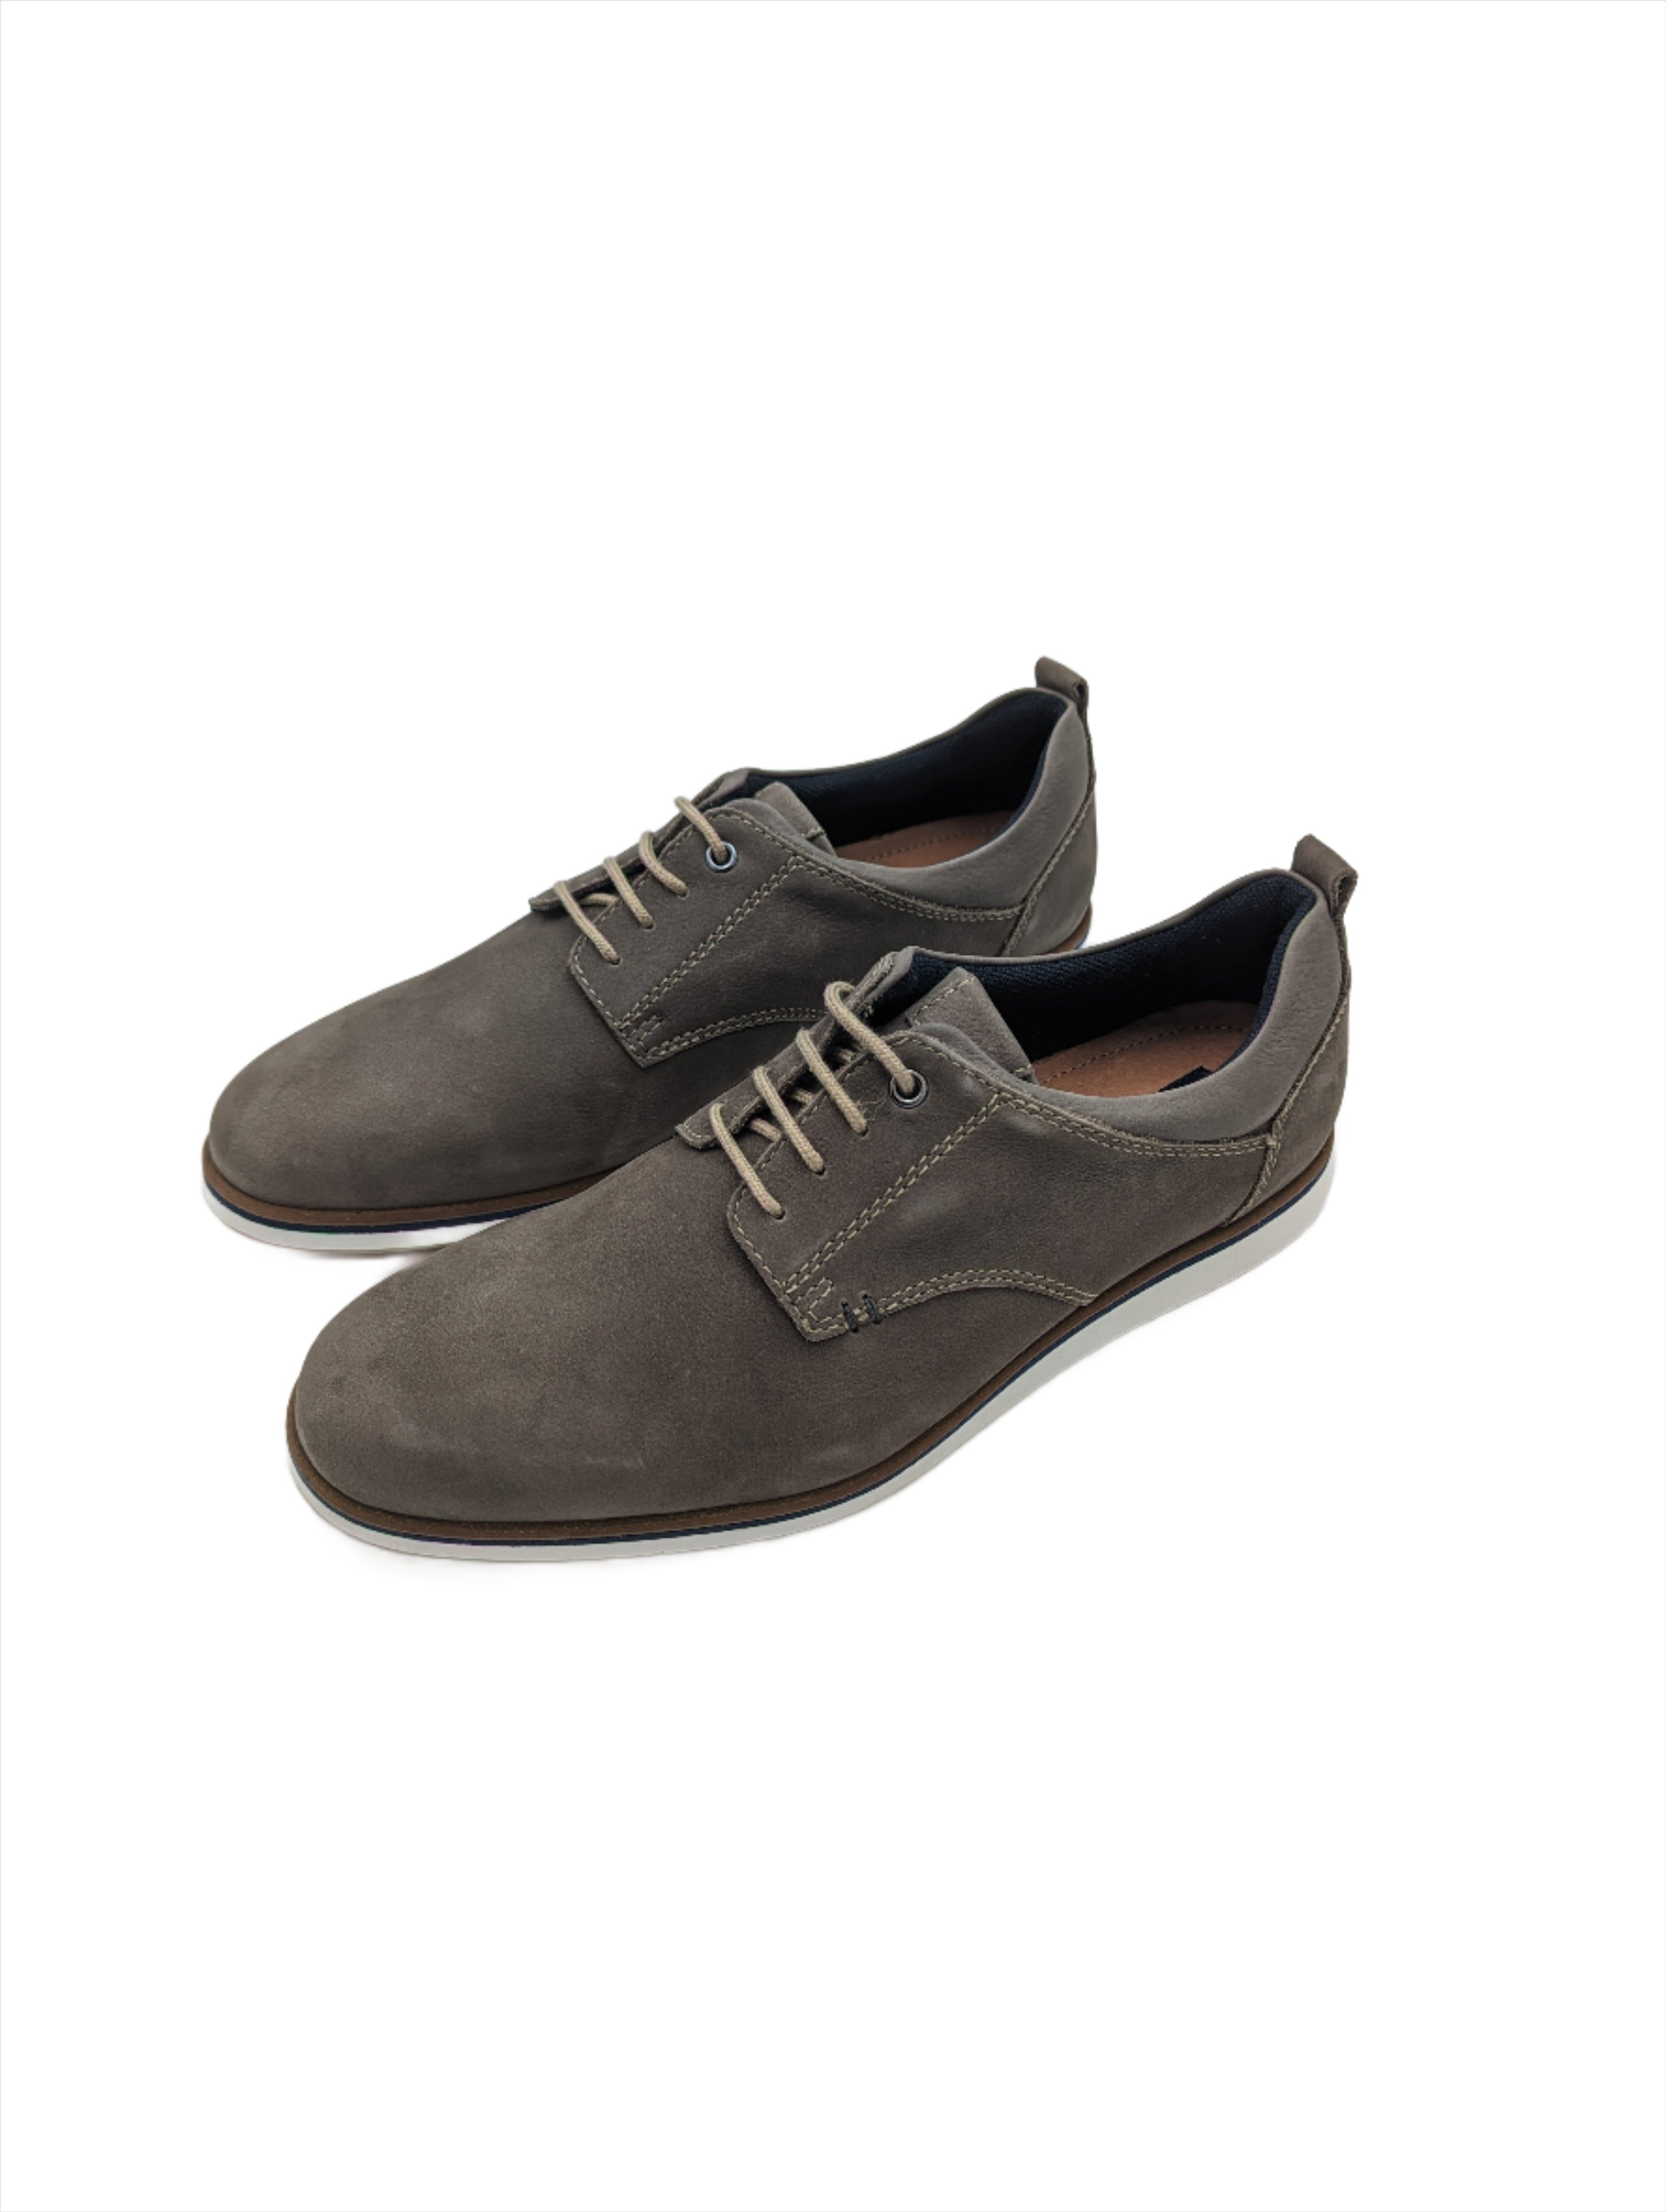 Stafford Pebble lace up shoe